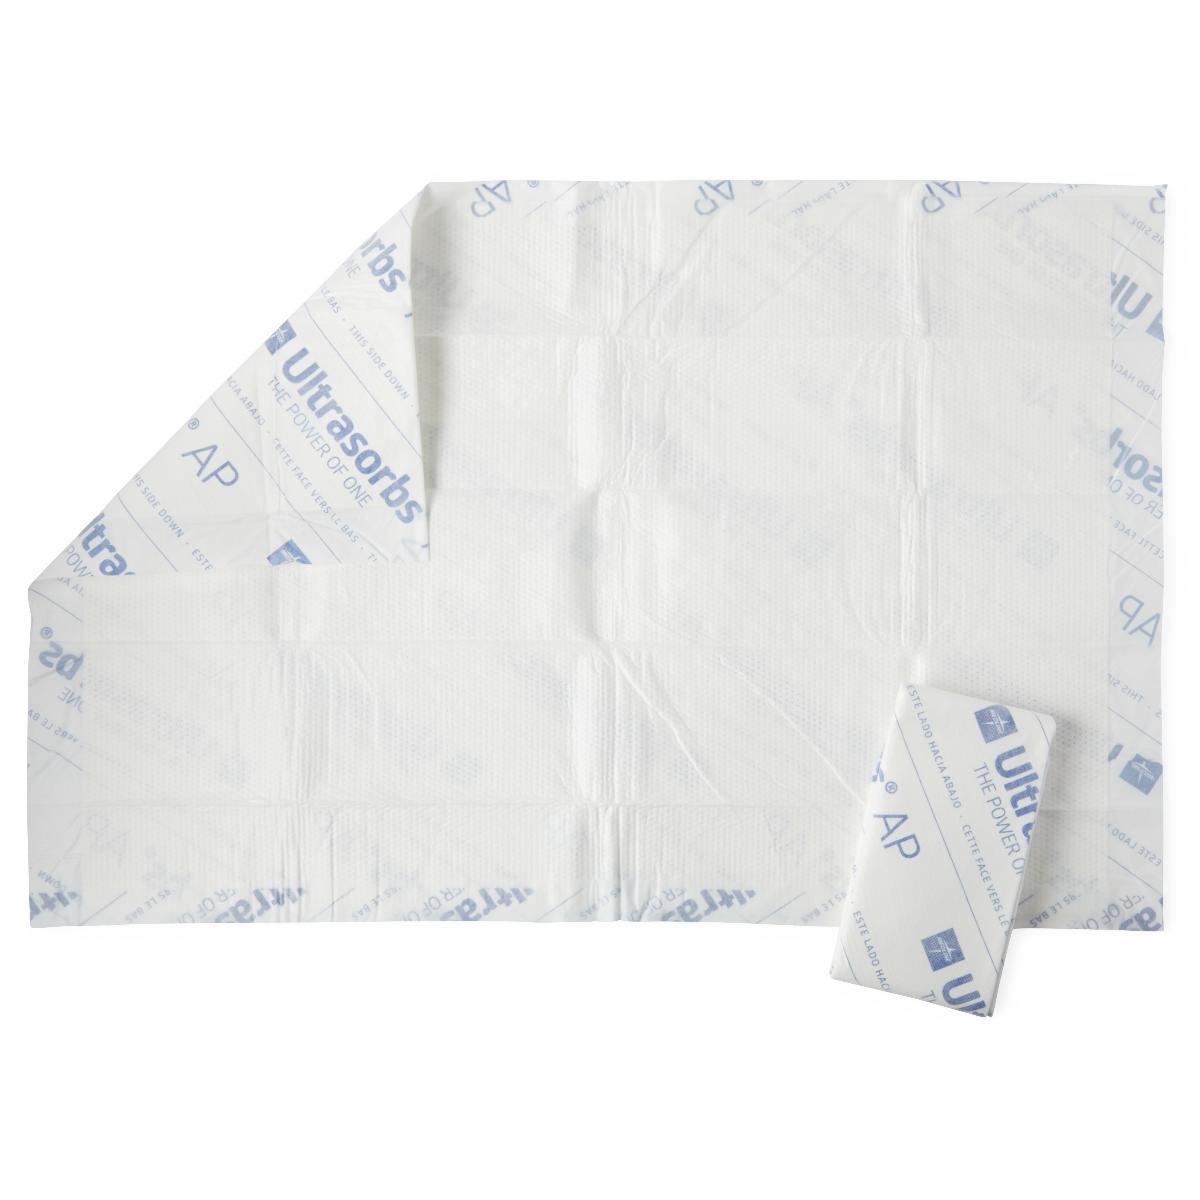 Frcolor Bed Pads Pad Incontinence Disposable Absorbent Sheets Mats